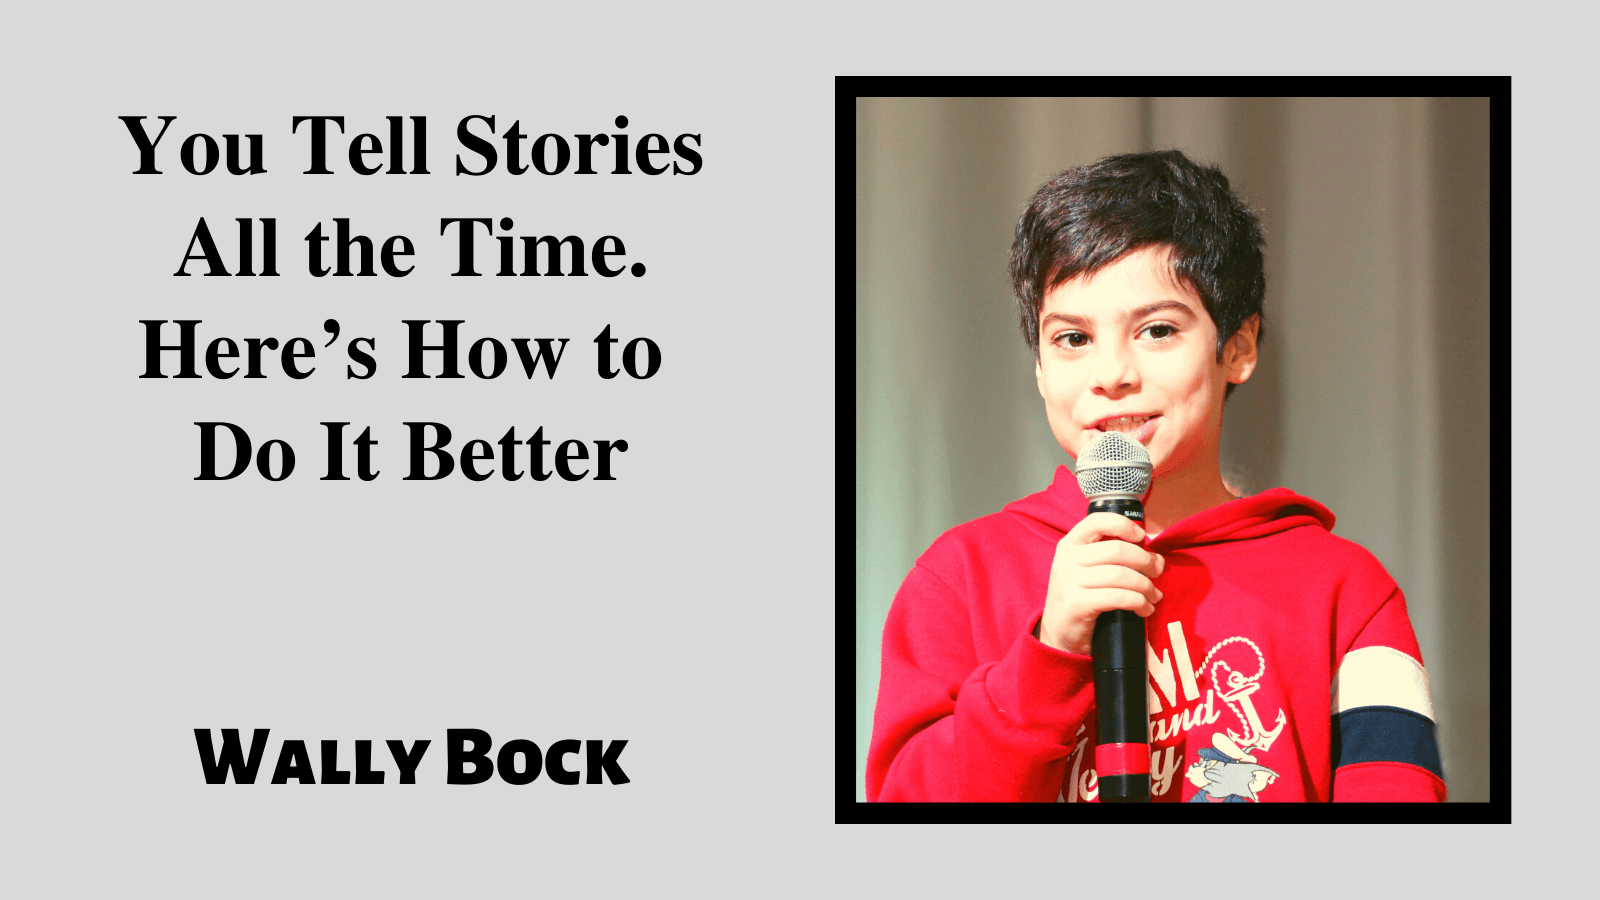 You tell stories all the time. Here’s how to do it better.